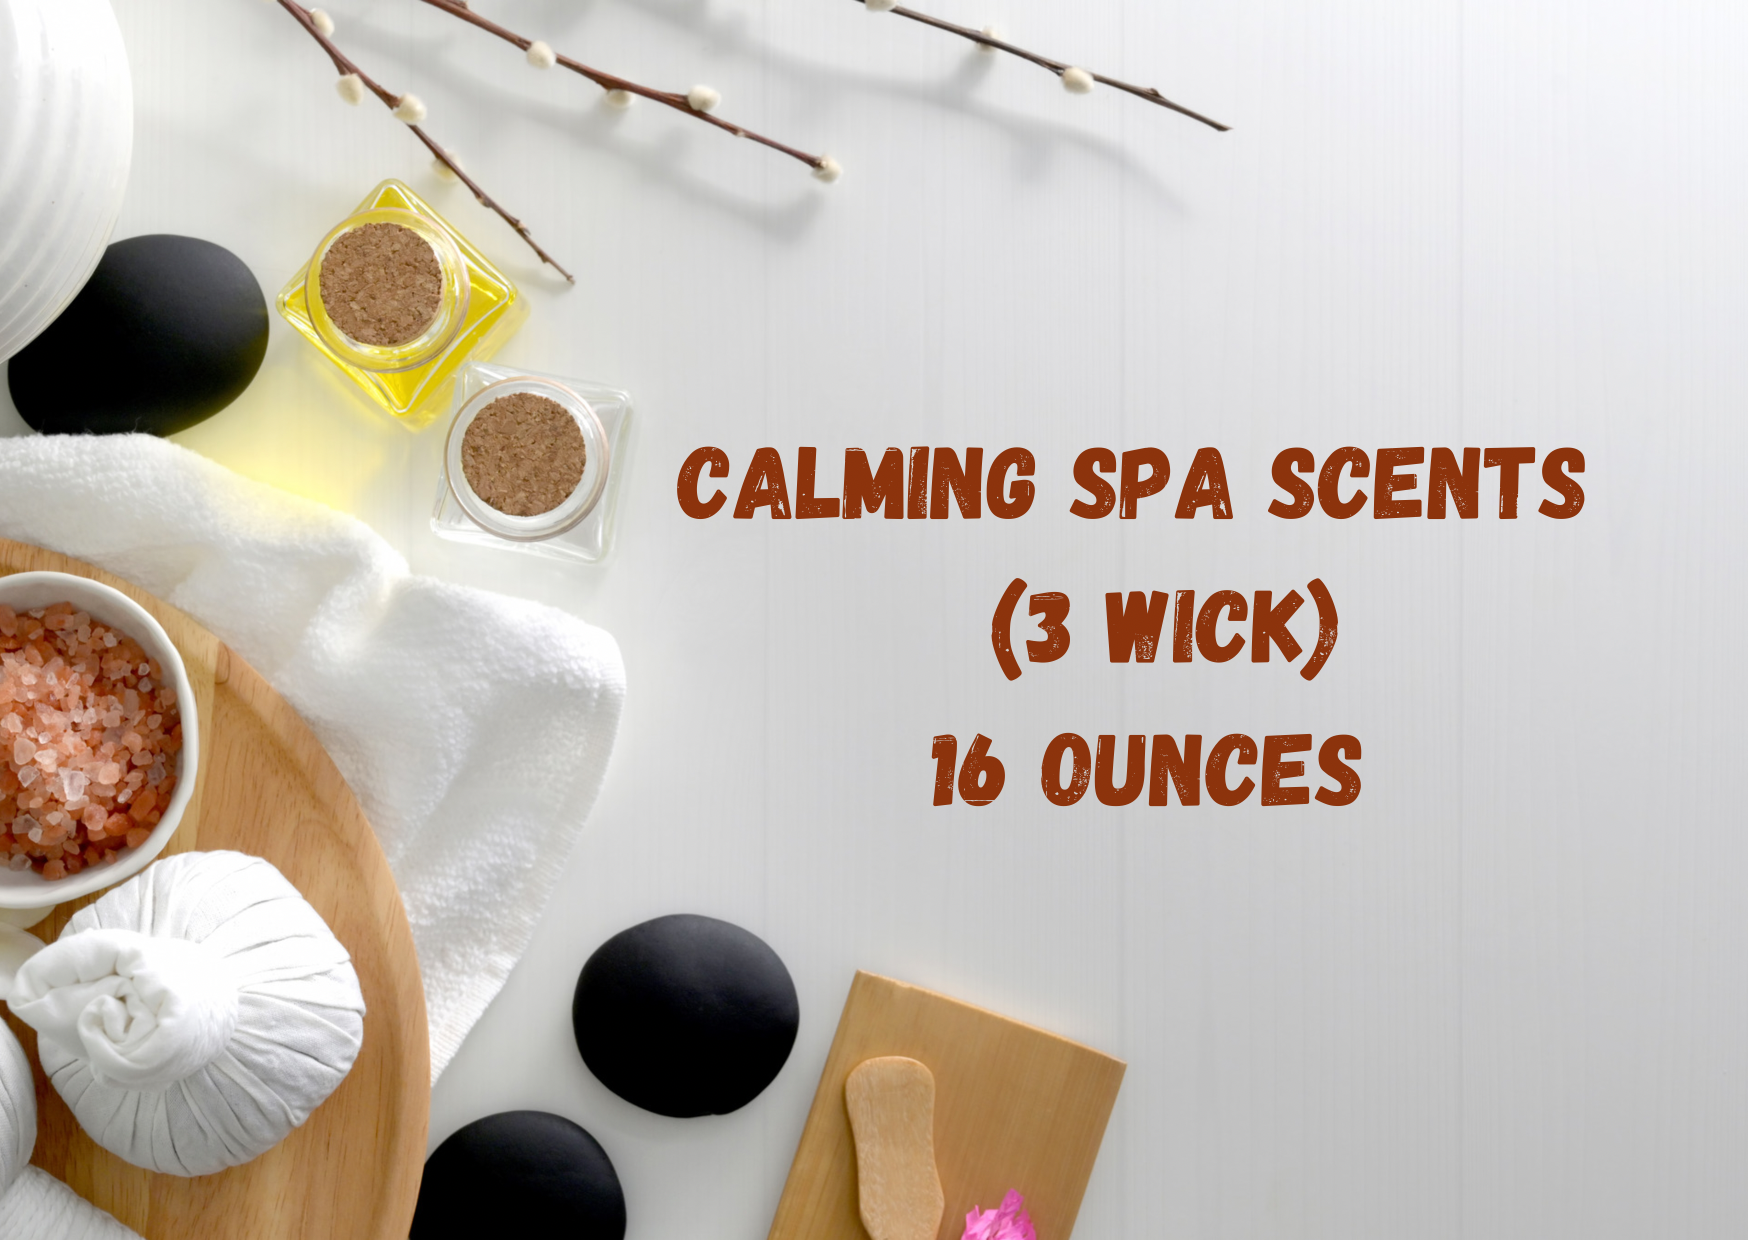 3-wick, 16oz Candles (Calming Spa Scents)